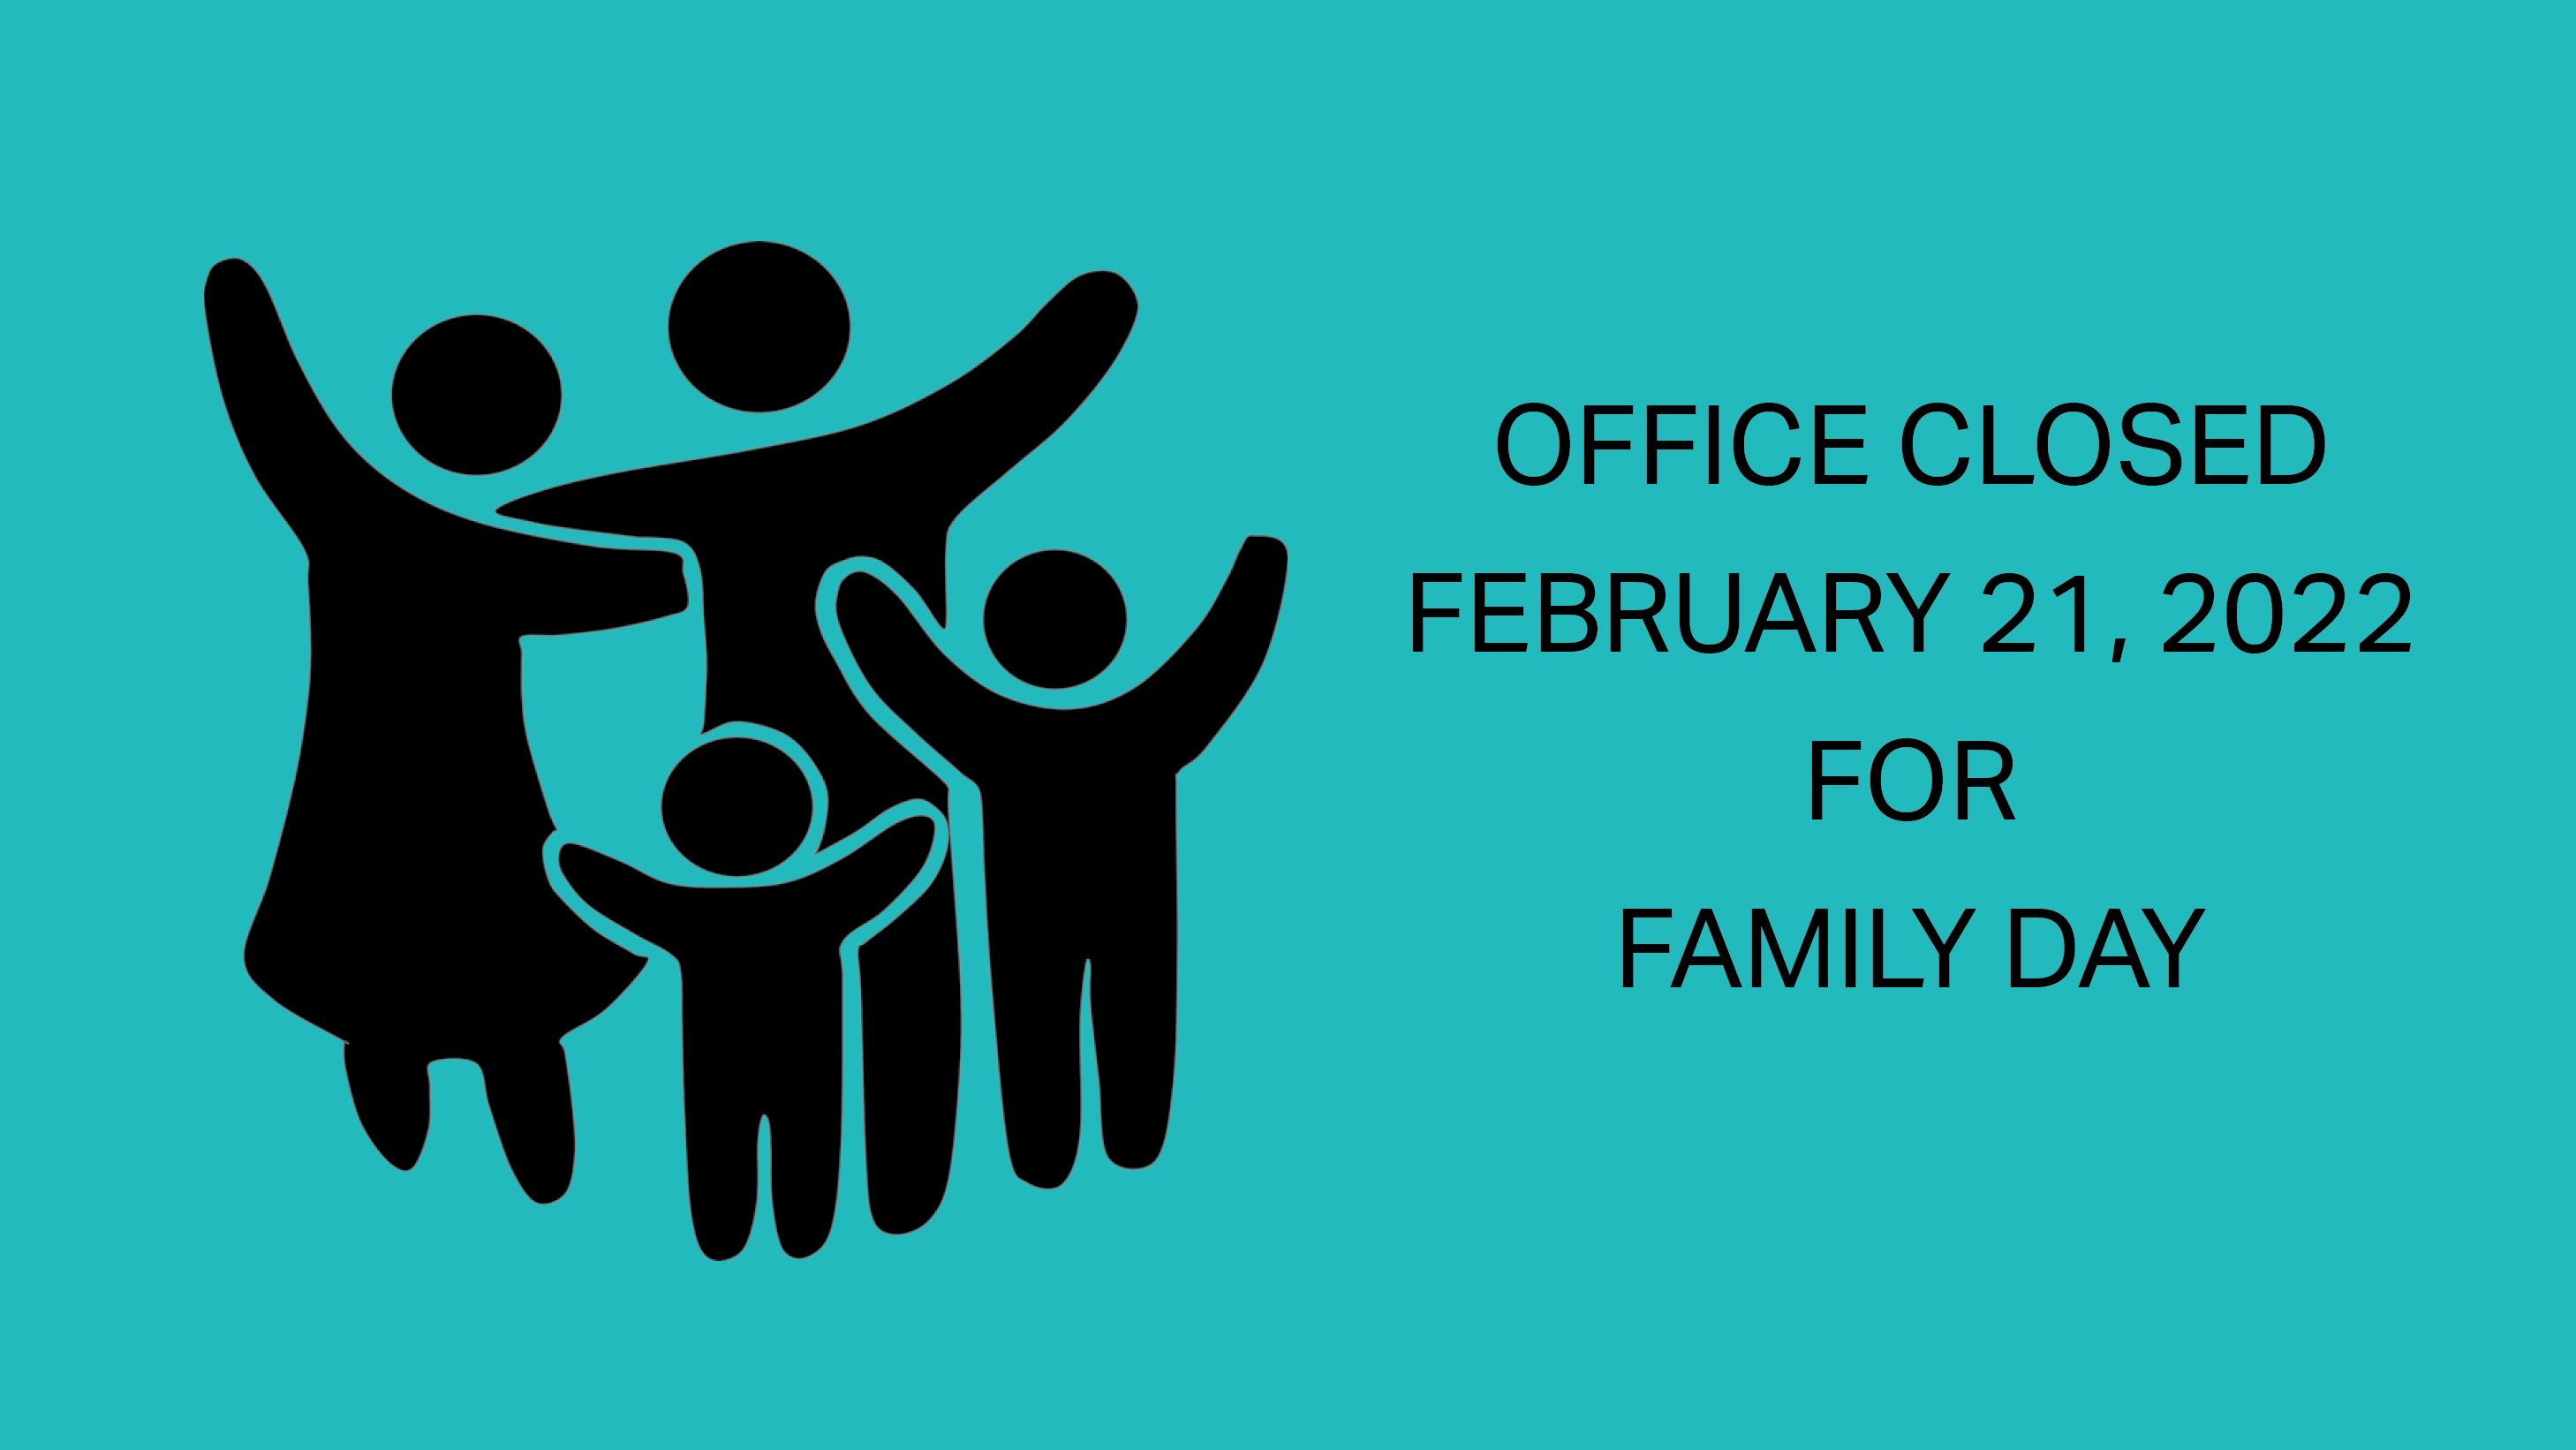 Office Closed - February 21, 2022